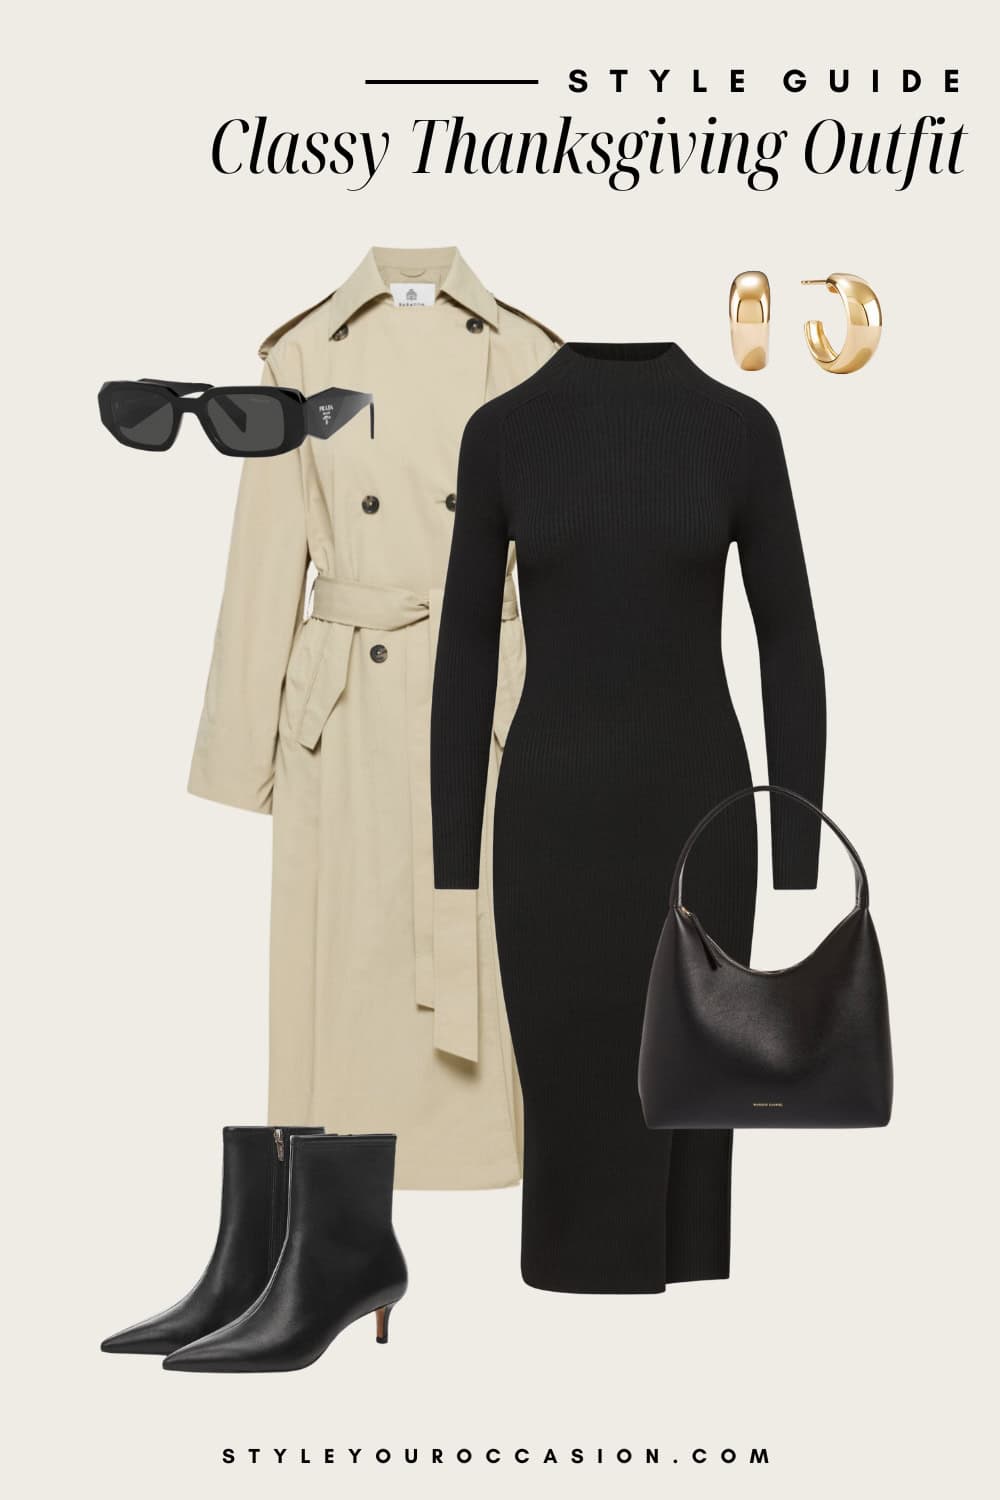 Flat lay outfit graphic of a black sweater dress with black booties and a tan trench coat.